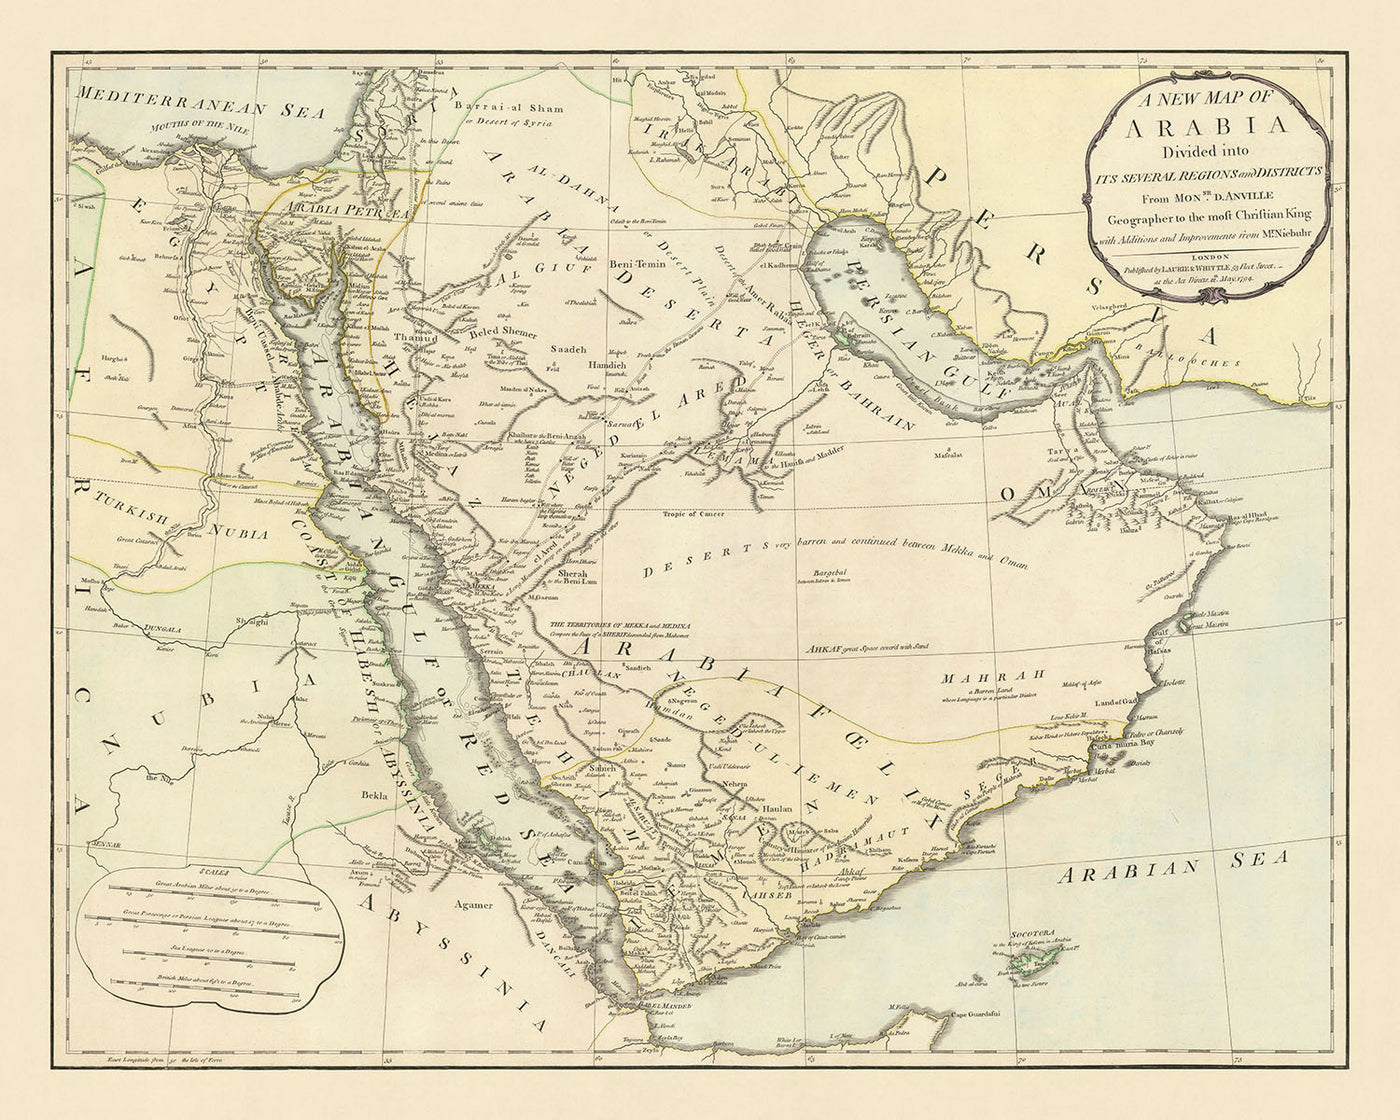 Old Map of the Middle East by Laurie & Whittle, 1794: Caravan Routes to Damascus, Bahrain, Yemen, Oman, Emirate of Ras Al Khaimah